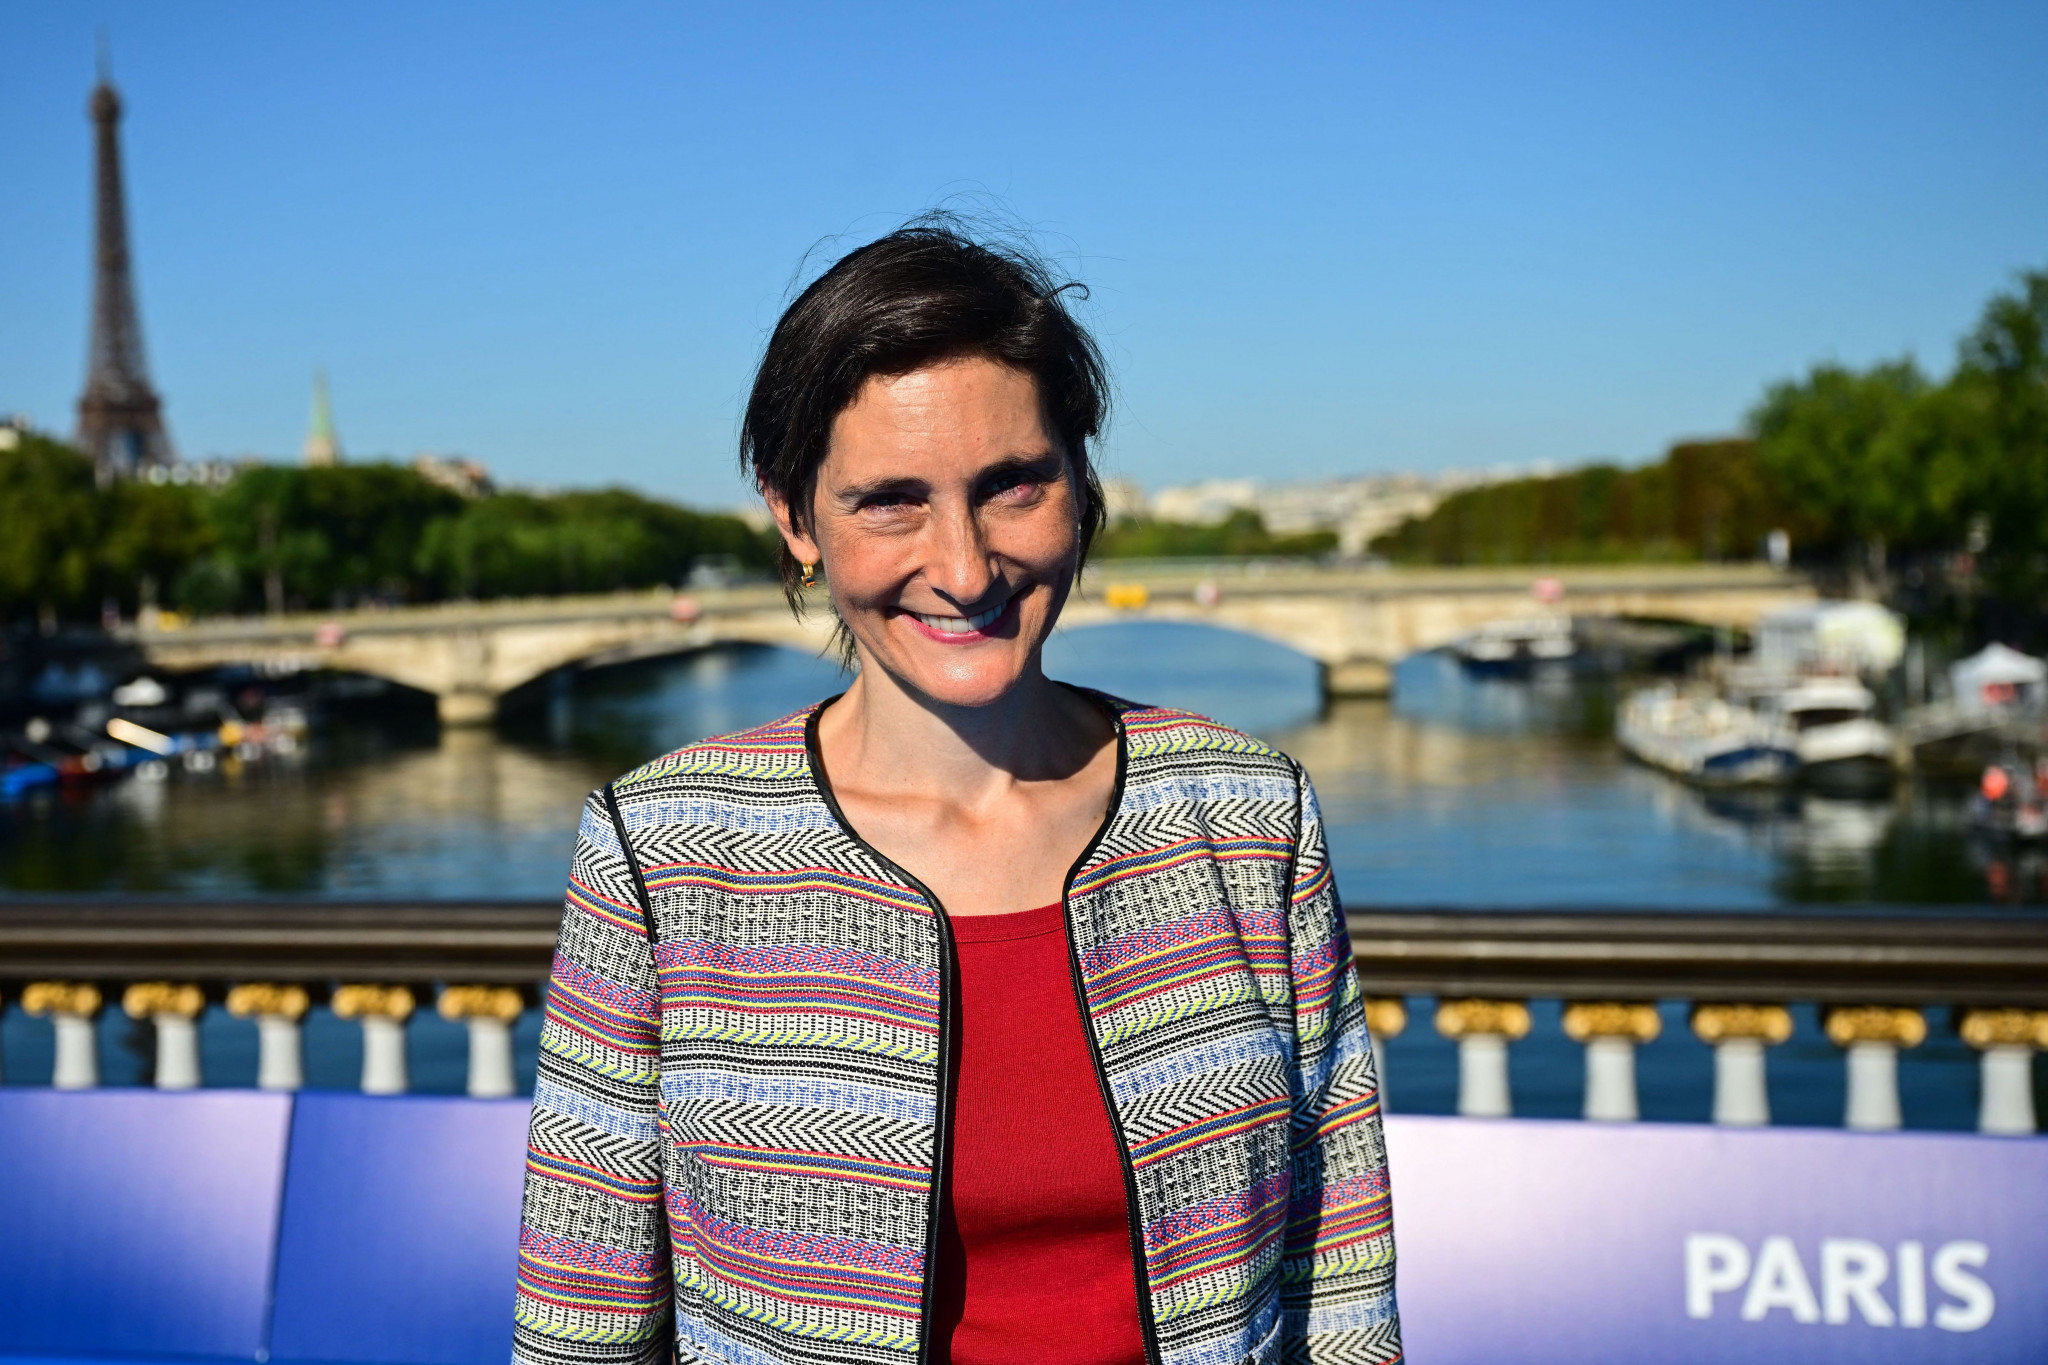 French Sports Minister Amélie Oudéa-Castéra has called for a meeting with French Athletics Federation officials on August 29 to discuss the performance in Budapest ©Getty Images